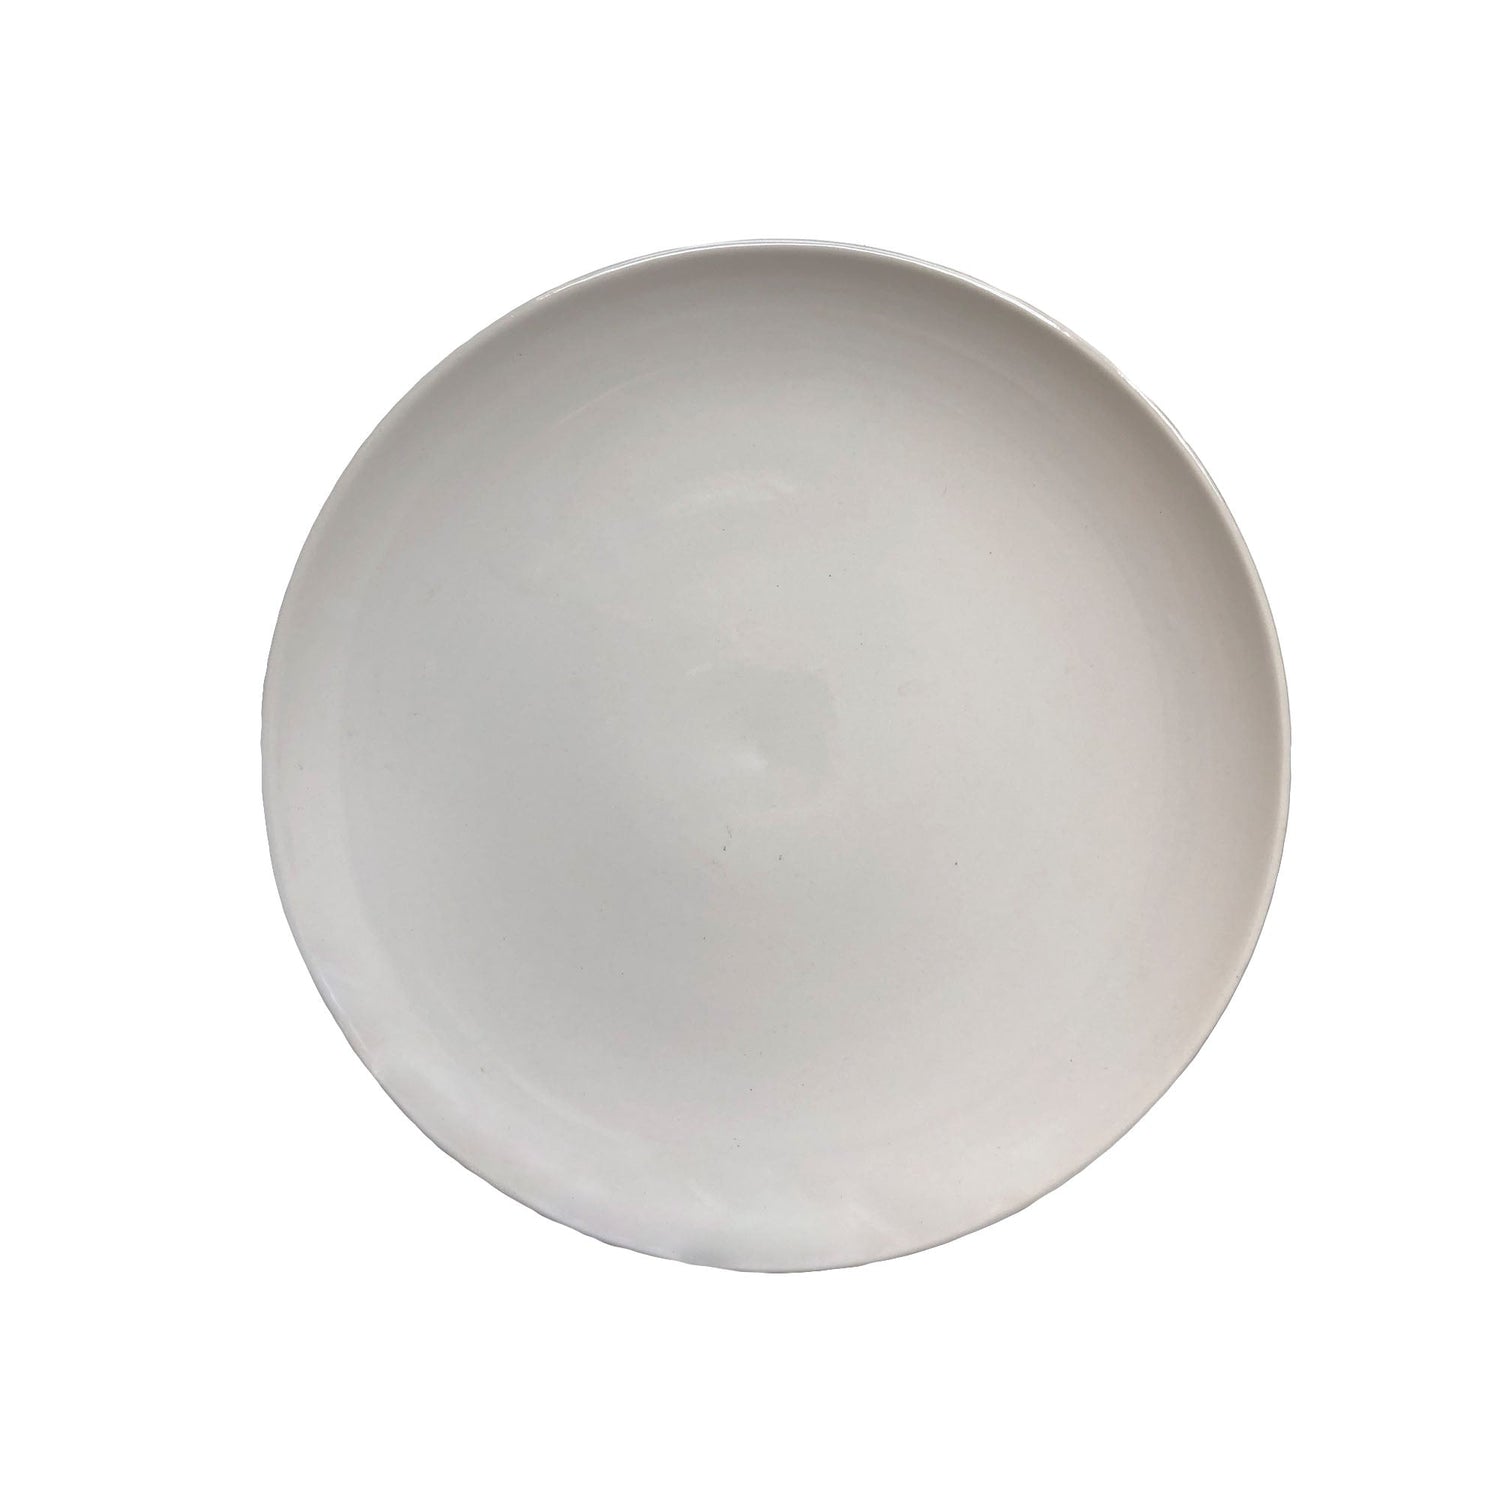 Shell Bisque 16-piece place setting - White